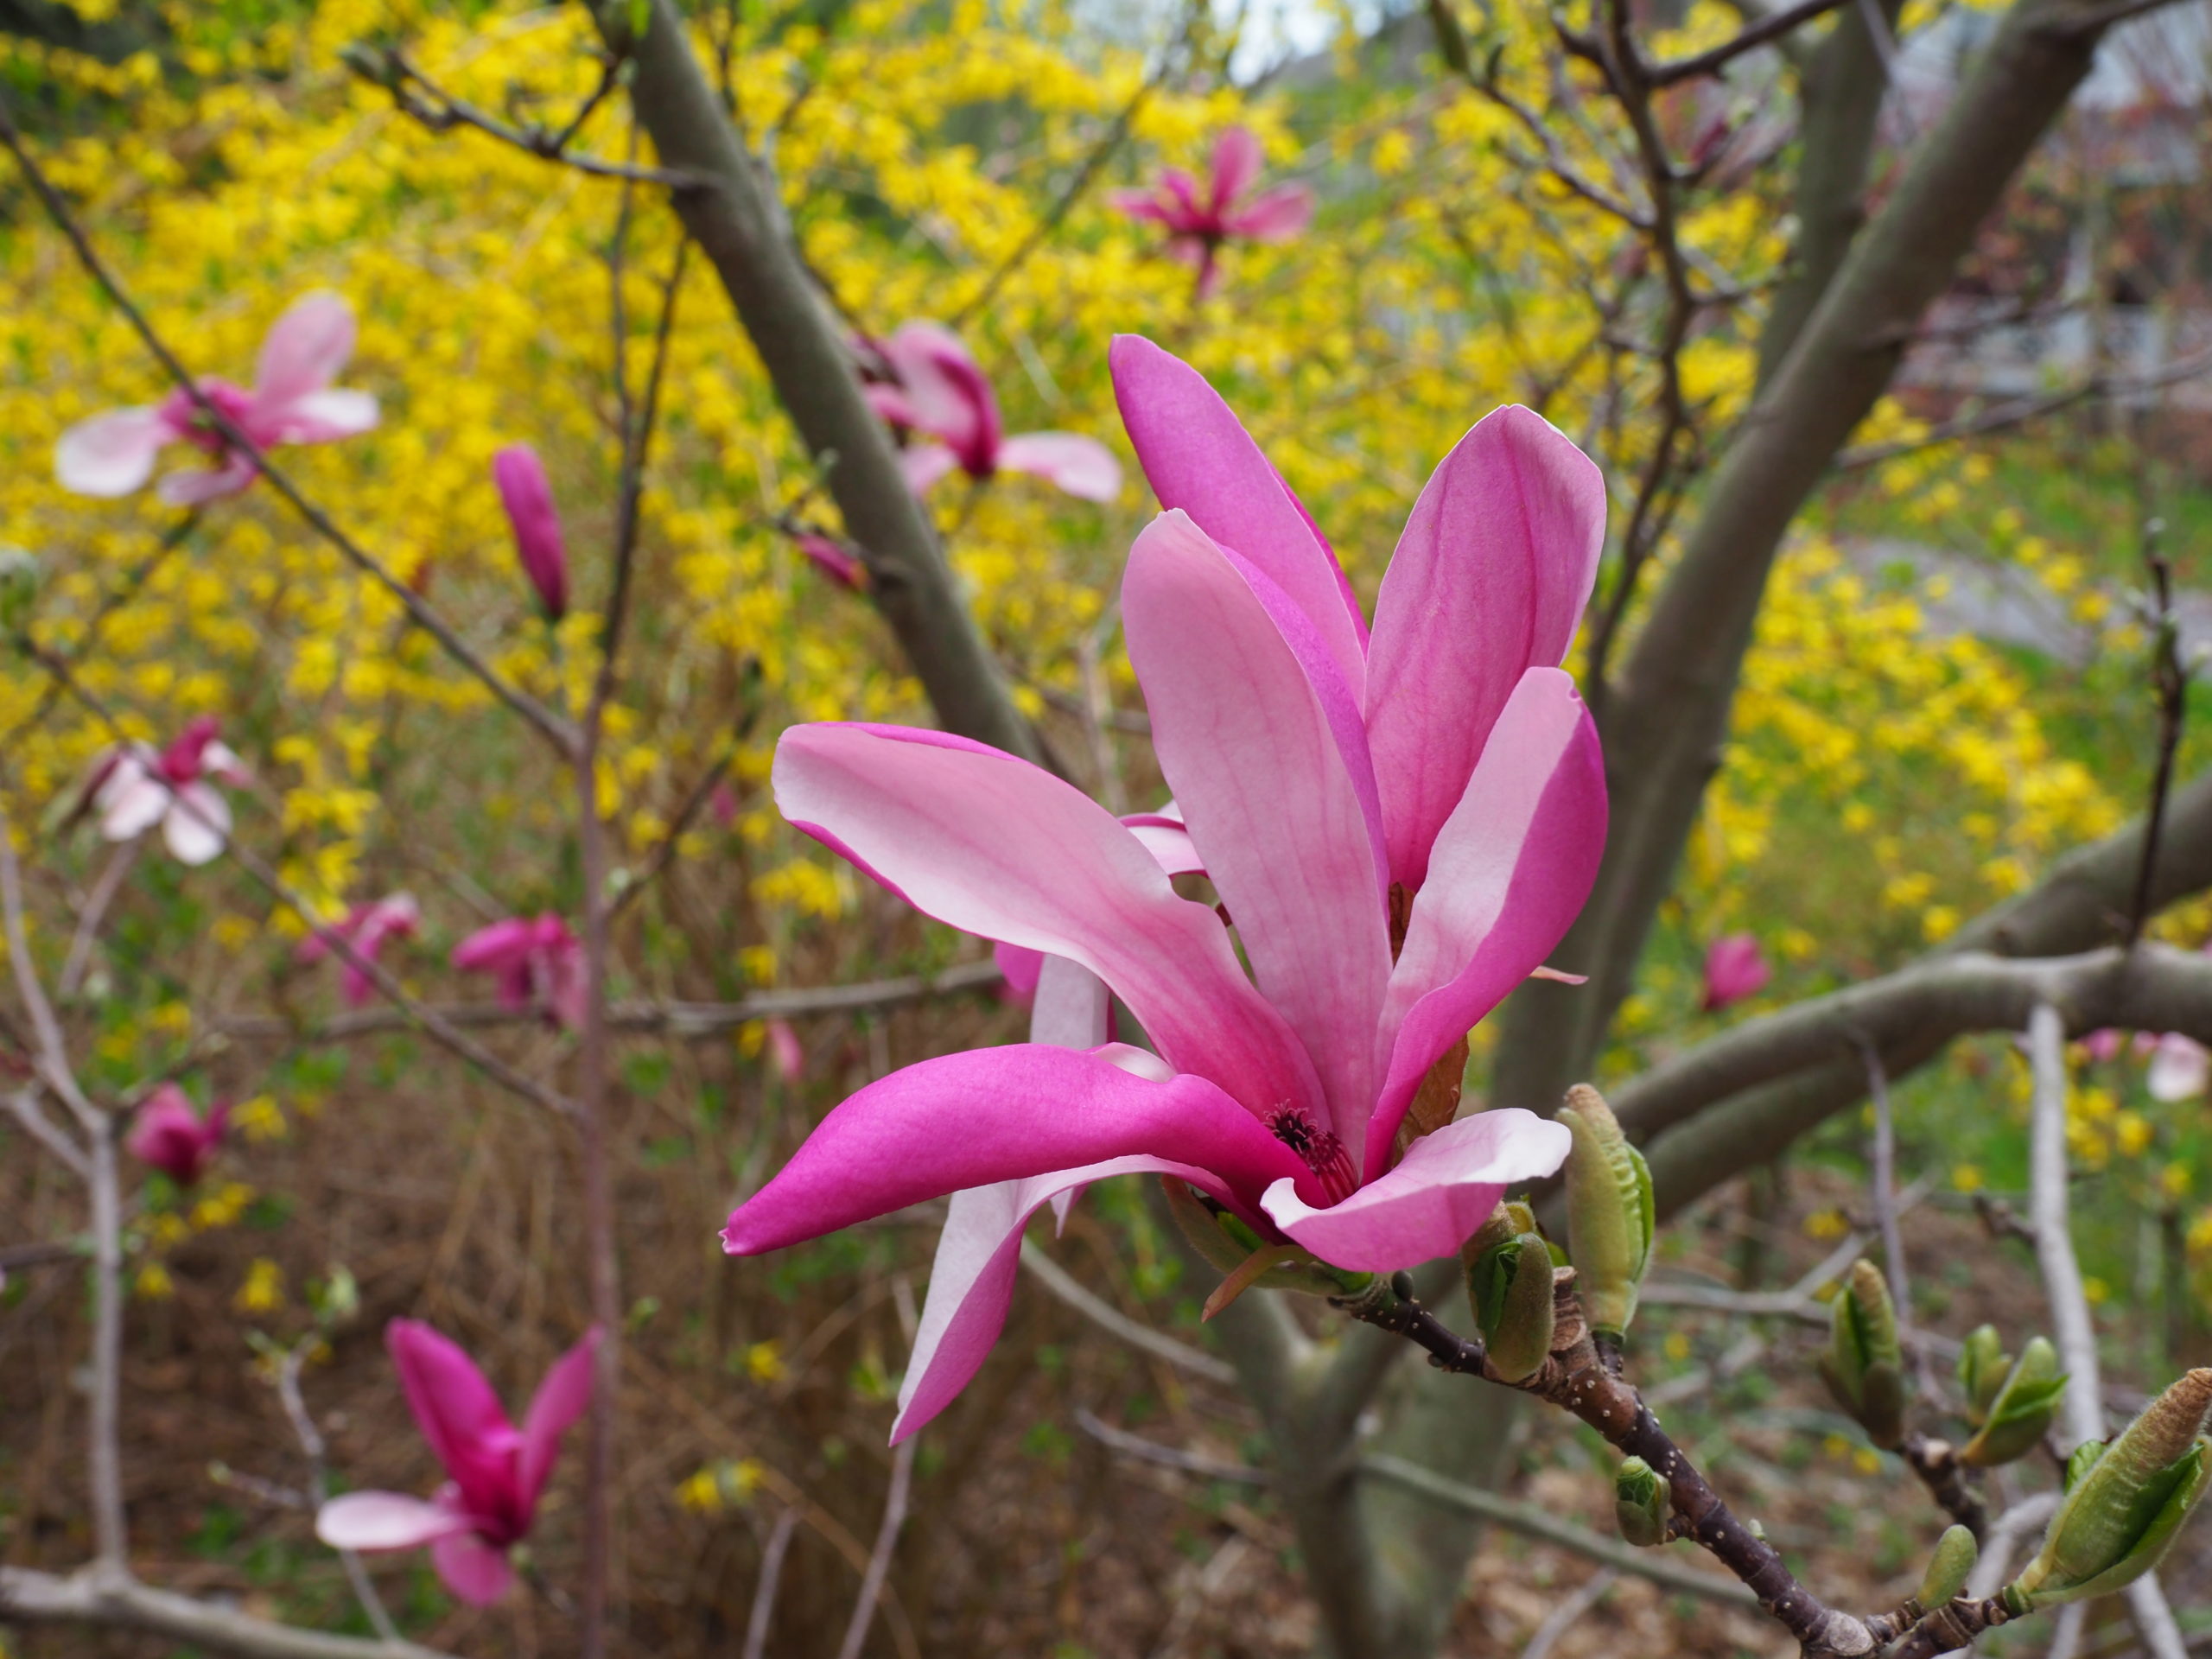 With no late frost or freeze it was a wonderful spring for Magnolias. This variety is Purple Star Power, which can bloom from late April and still have flowers opening in early June some years.